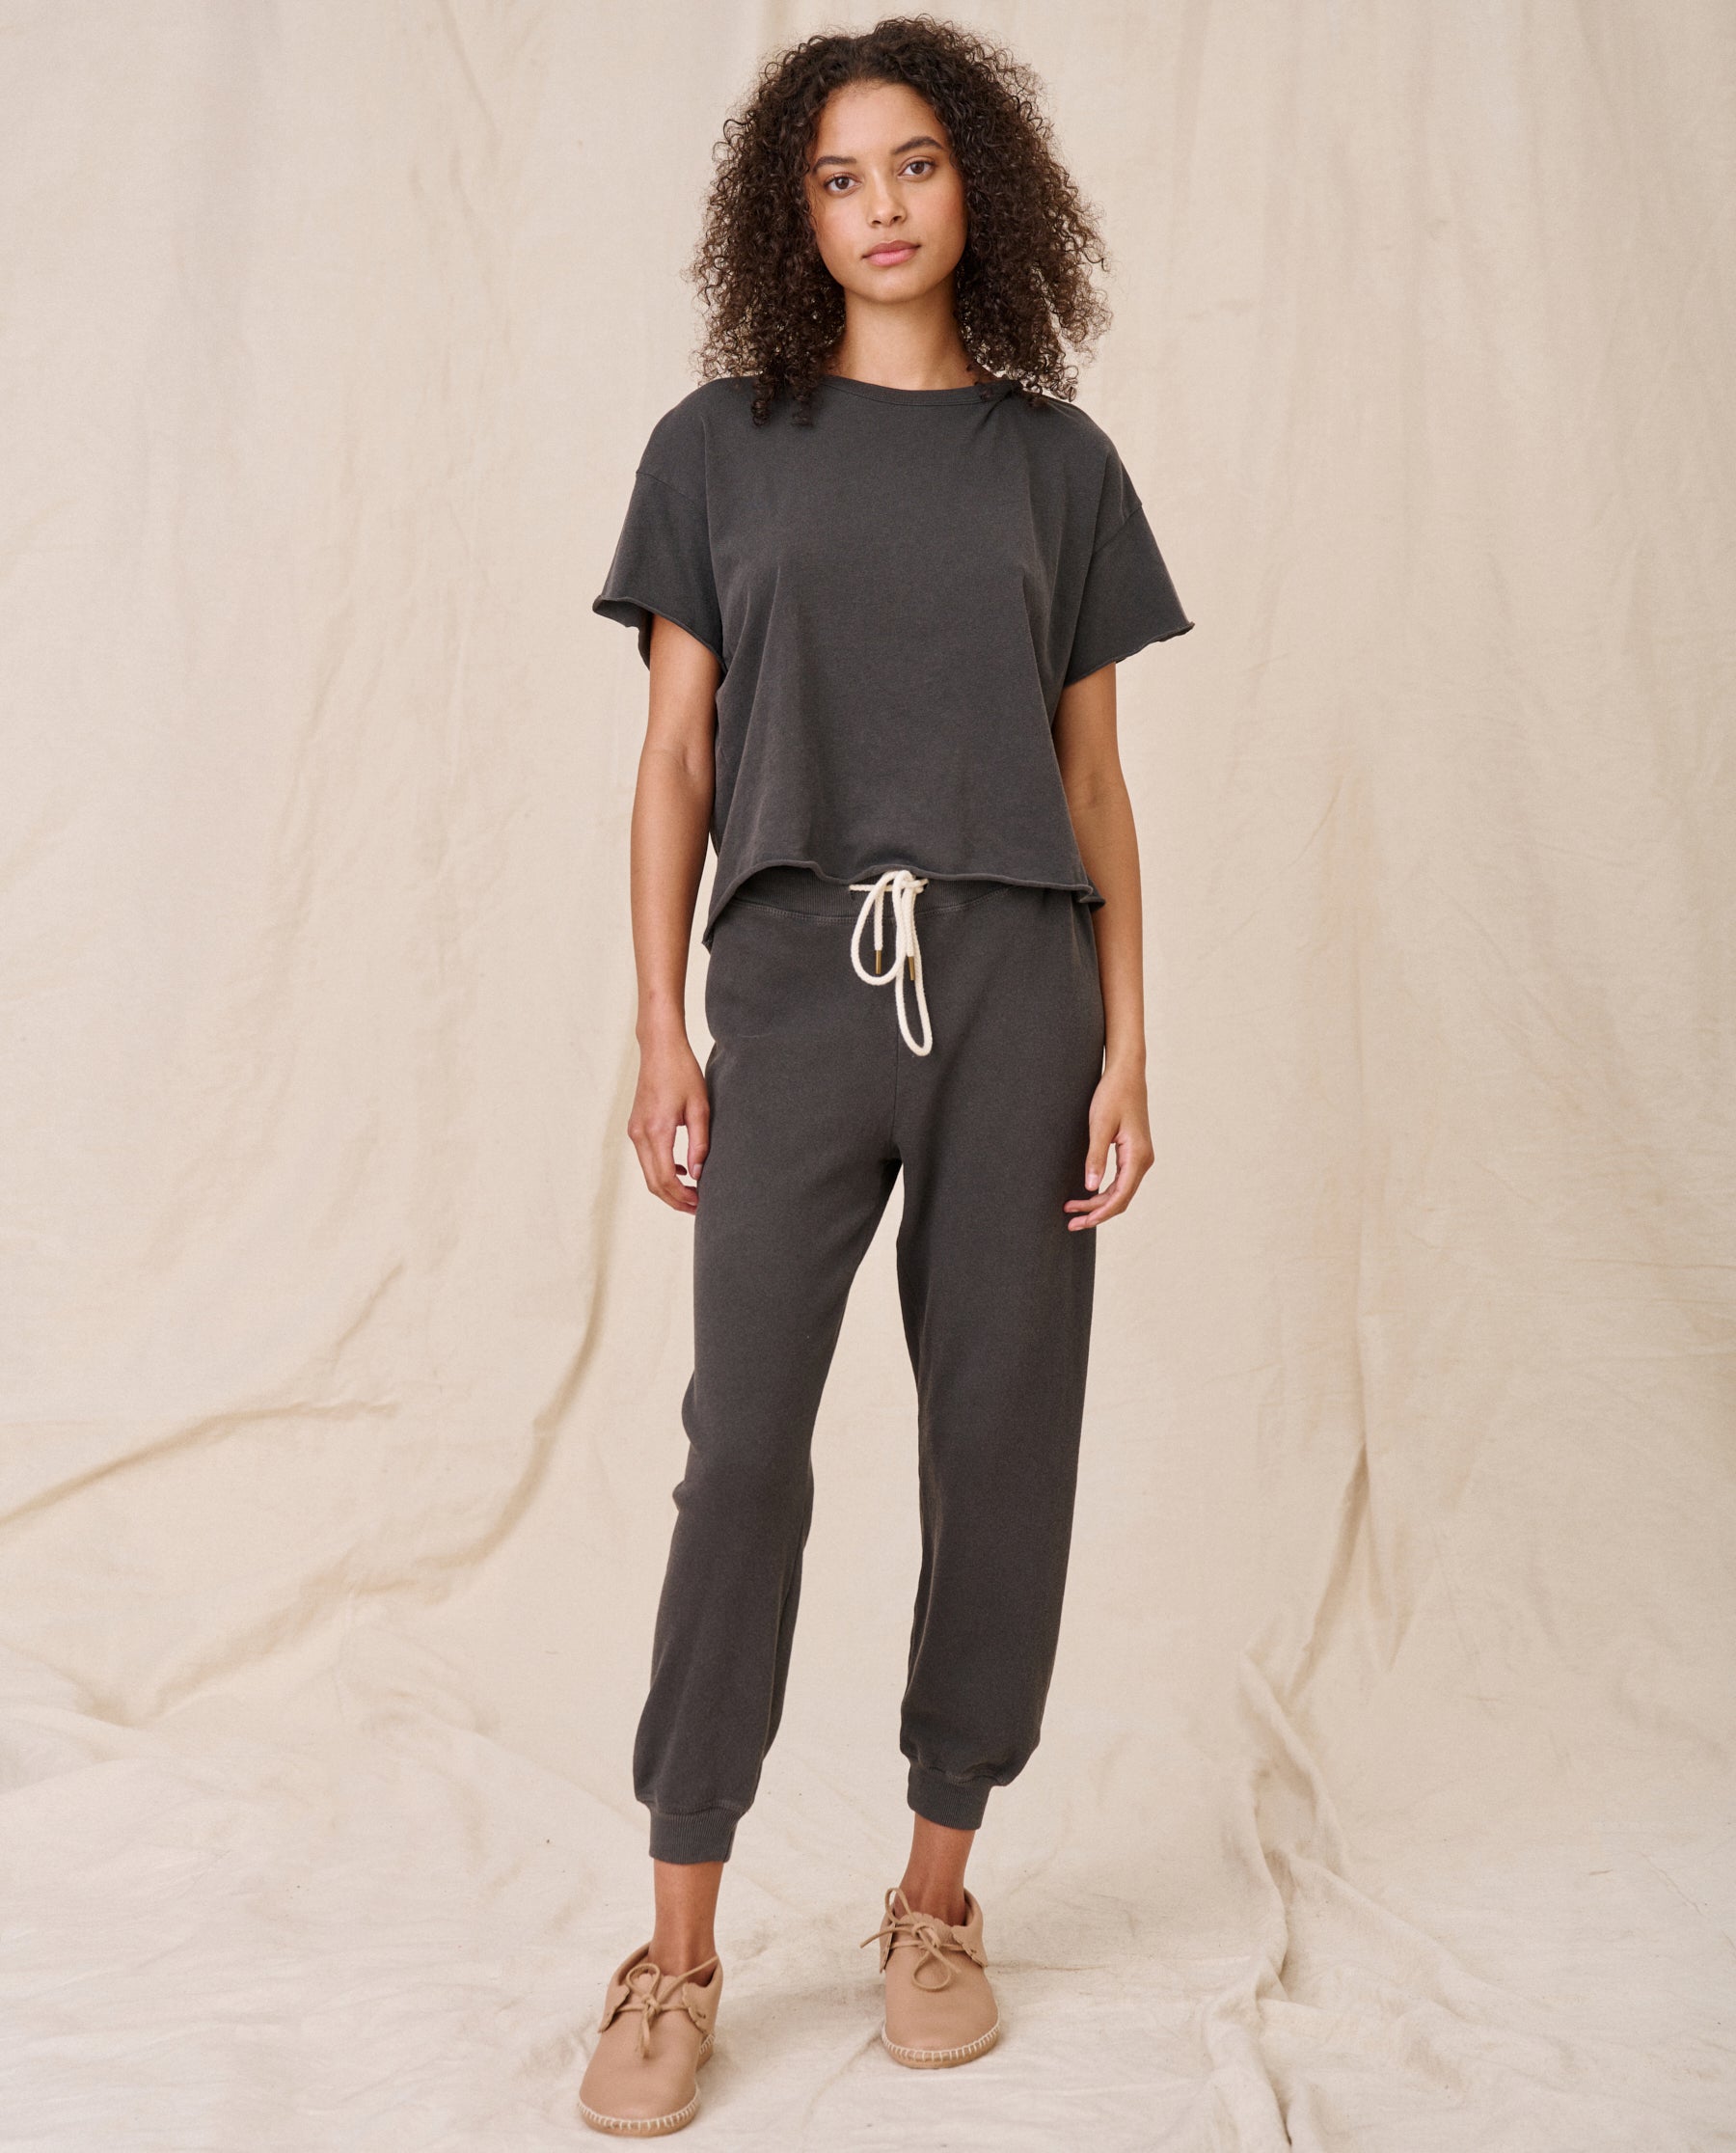 The Cropped Sweatpant. Solid -- Washed Black SWEATPANTS THE GREAT. CORE KNITS